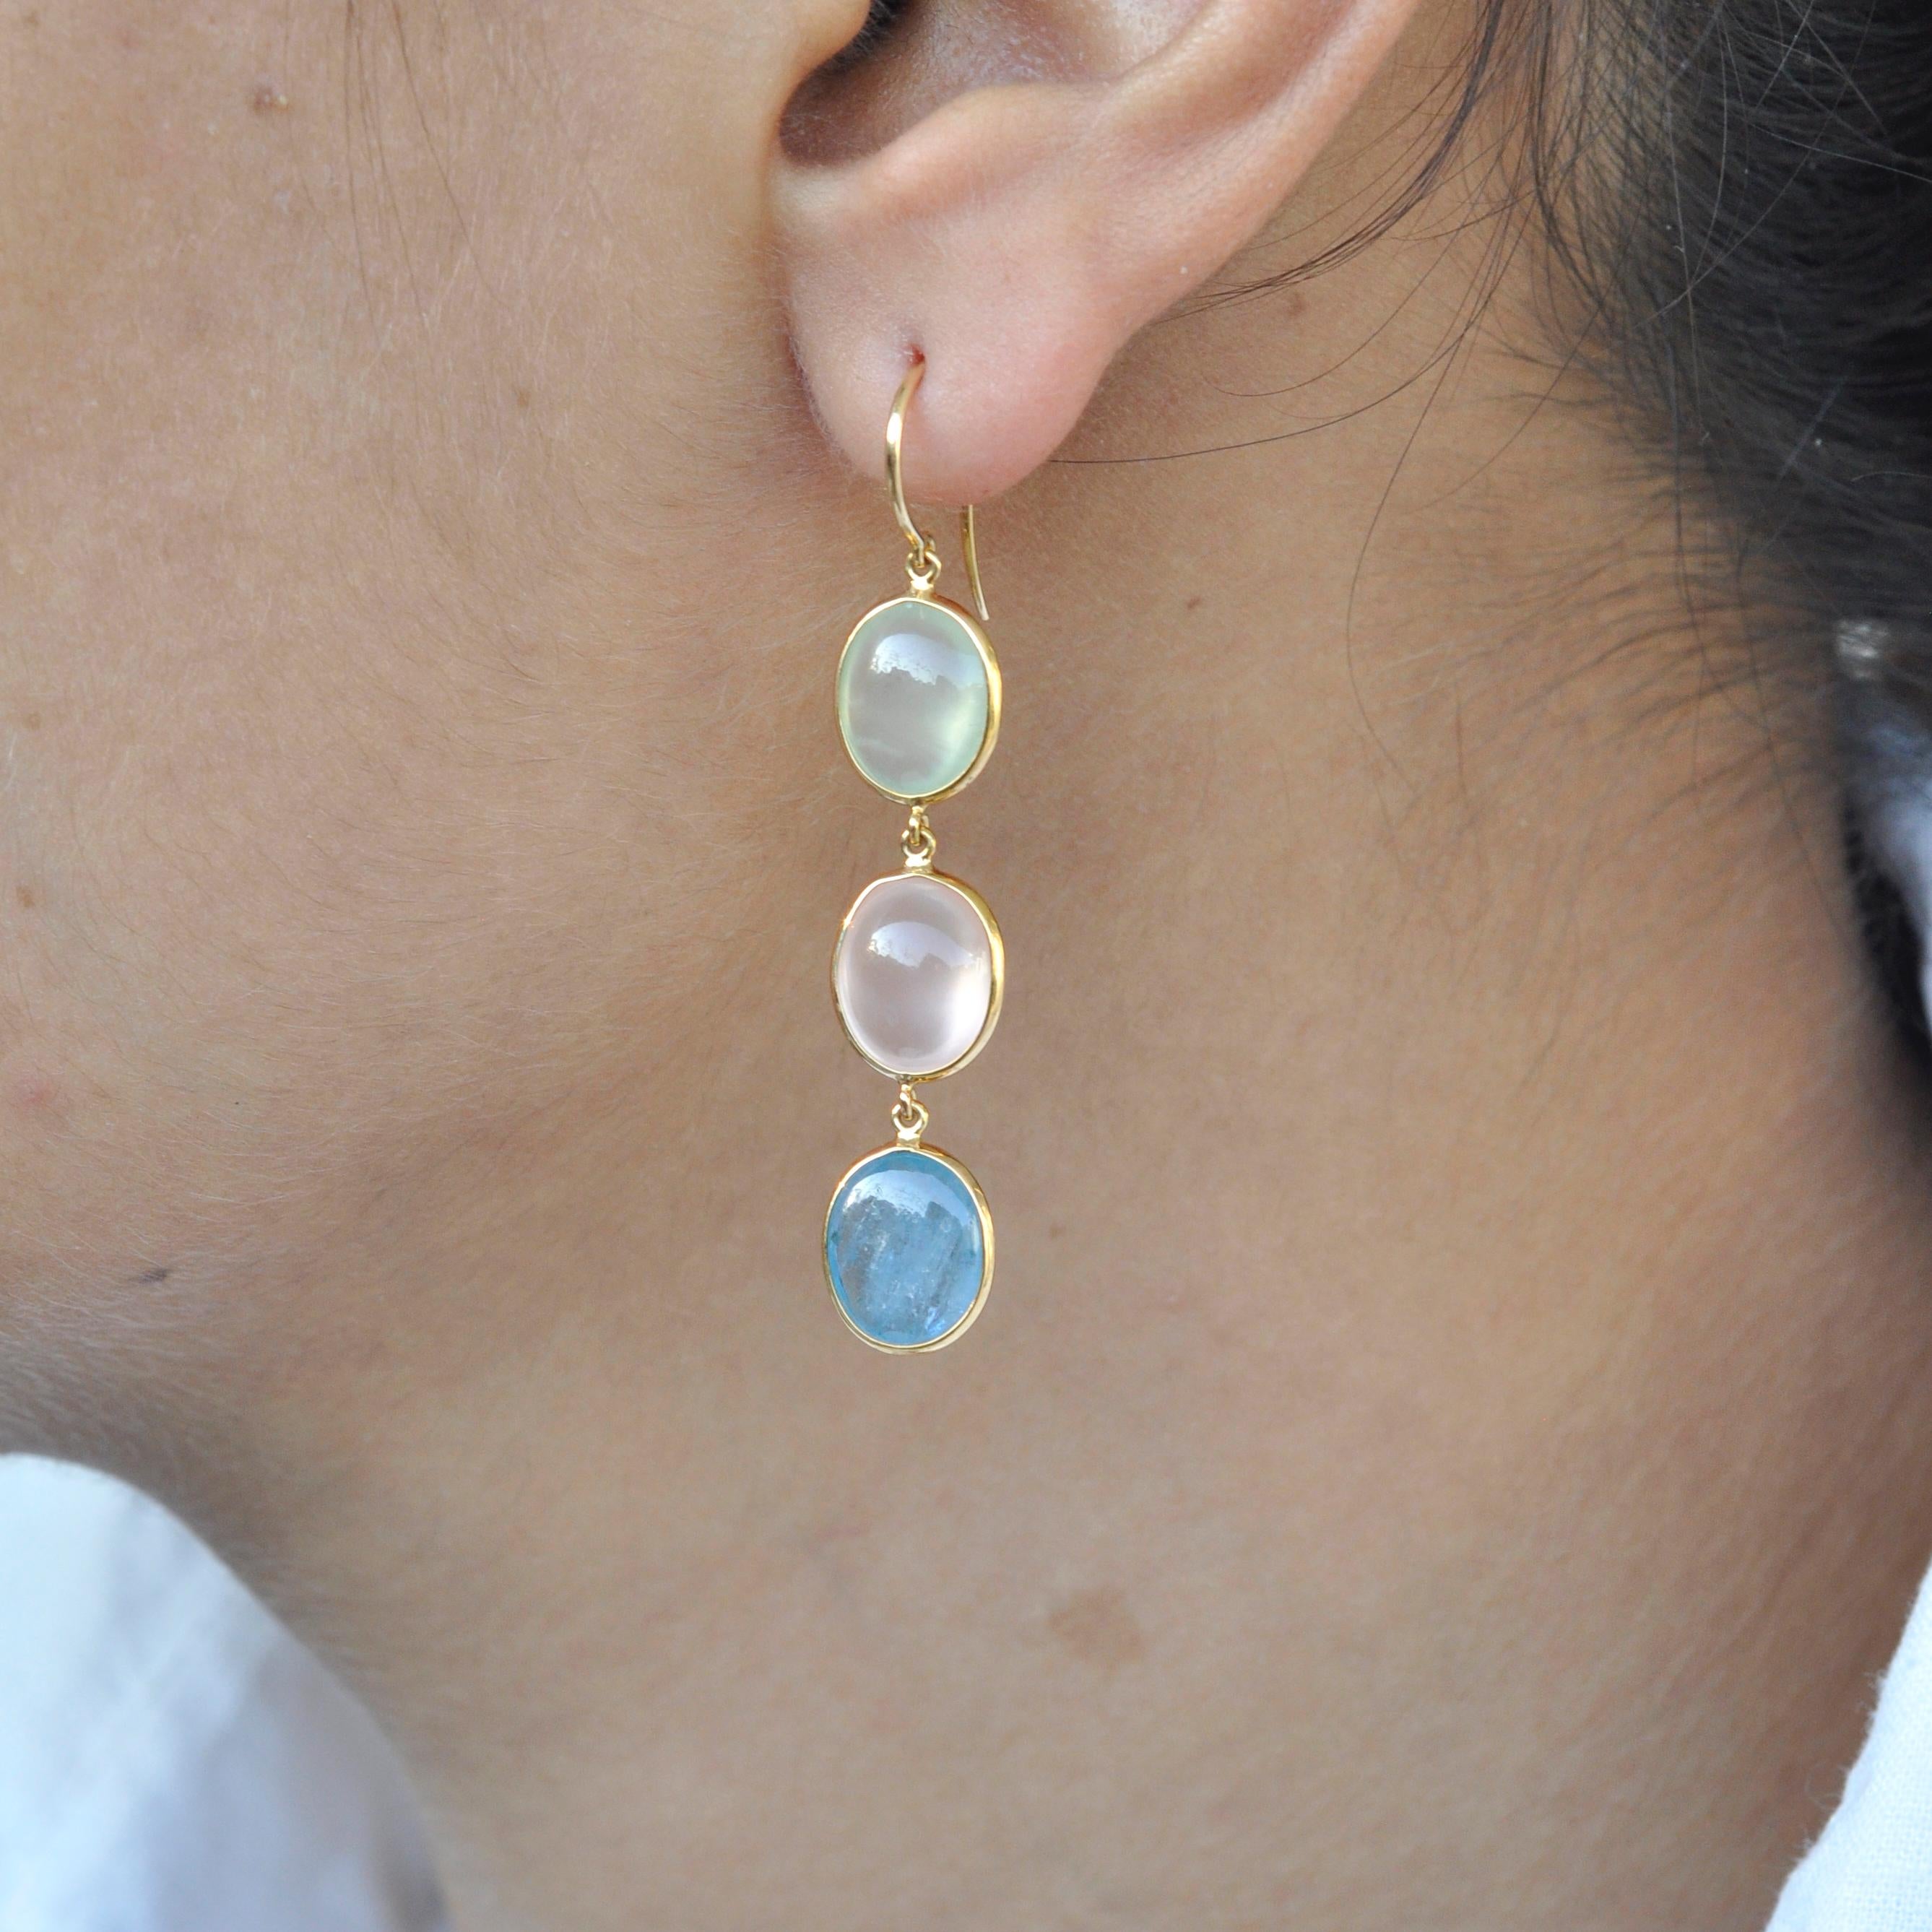 These stunning prehnite, rose quartz, aquamarine 18k yellow gold dangle earrings provide a look that is both trendy and classic. These earrings are a great staple to add to your collection, and can be worn with both casual and formal wear. These